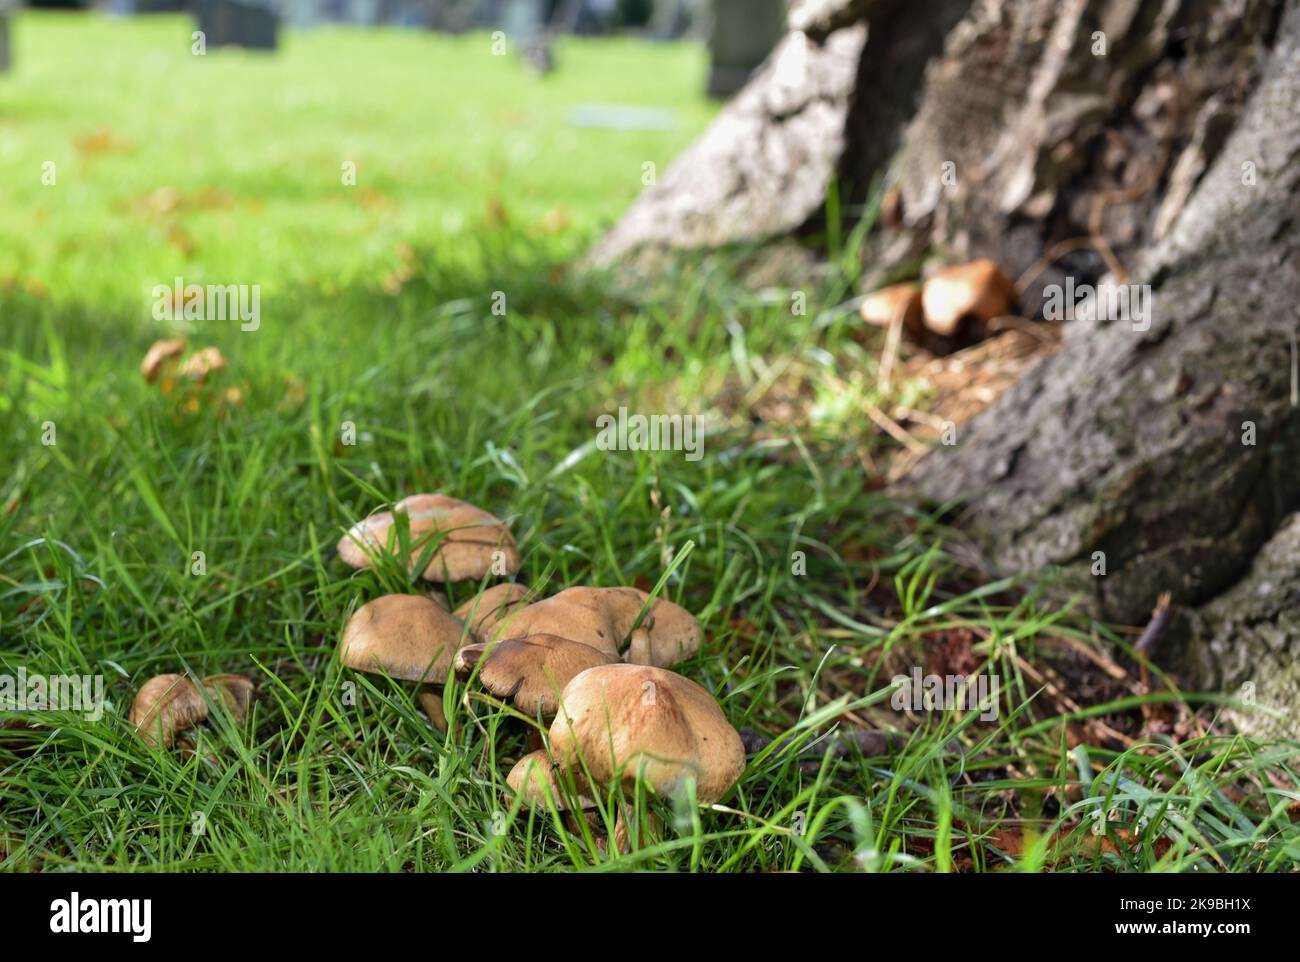 Bunch of wild clustered dome cap mushrooms growing amongst green grass Stock Photo